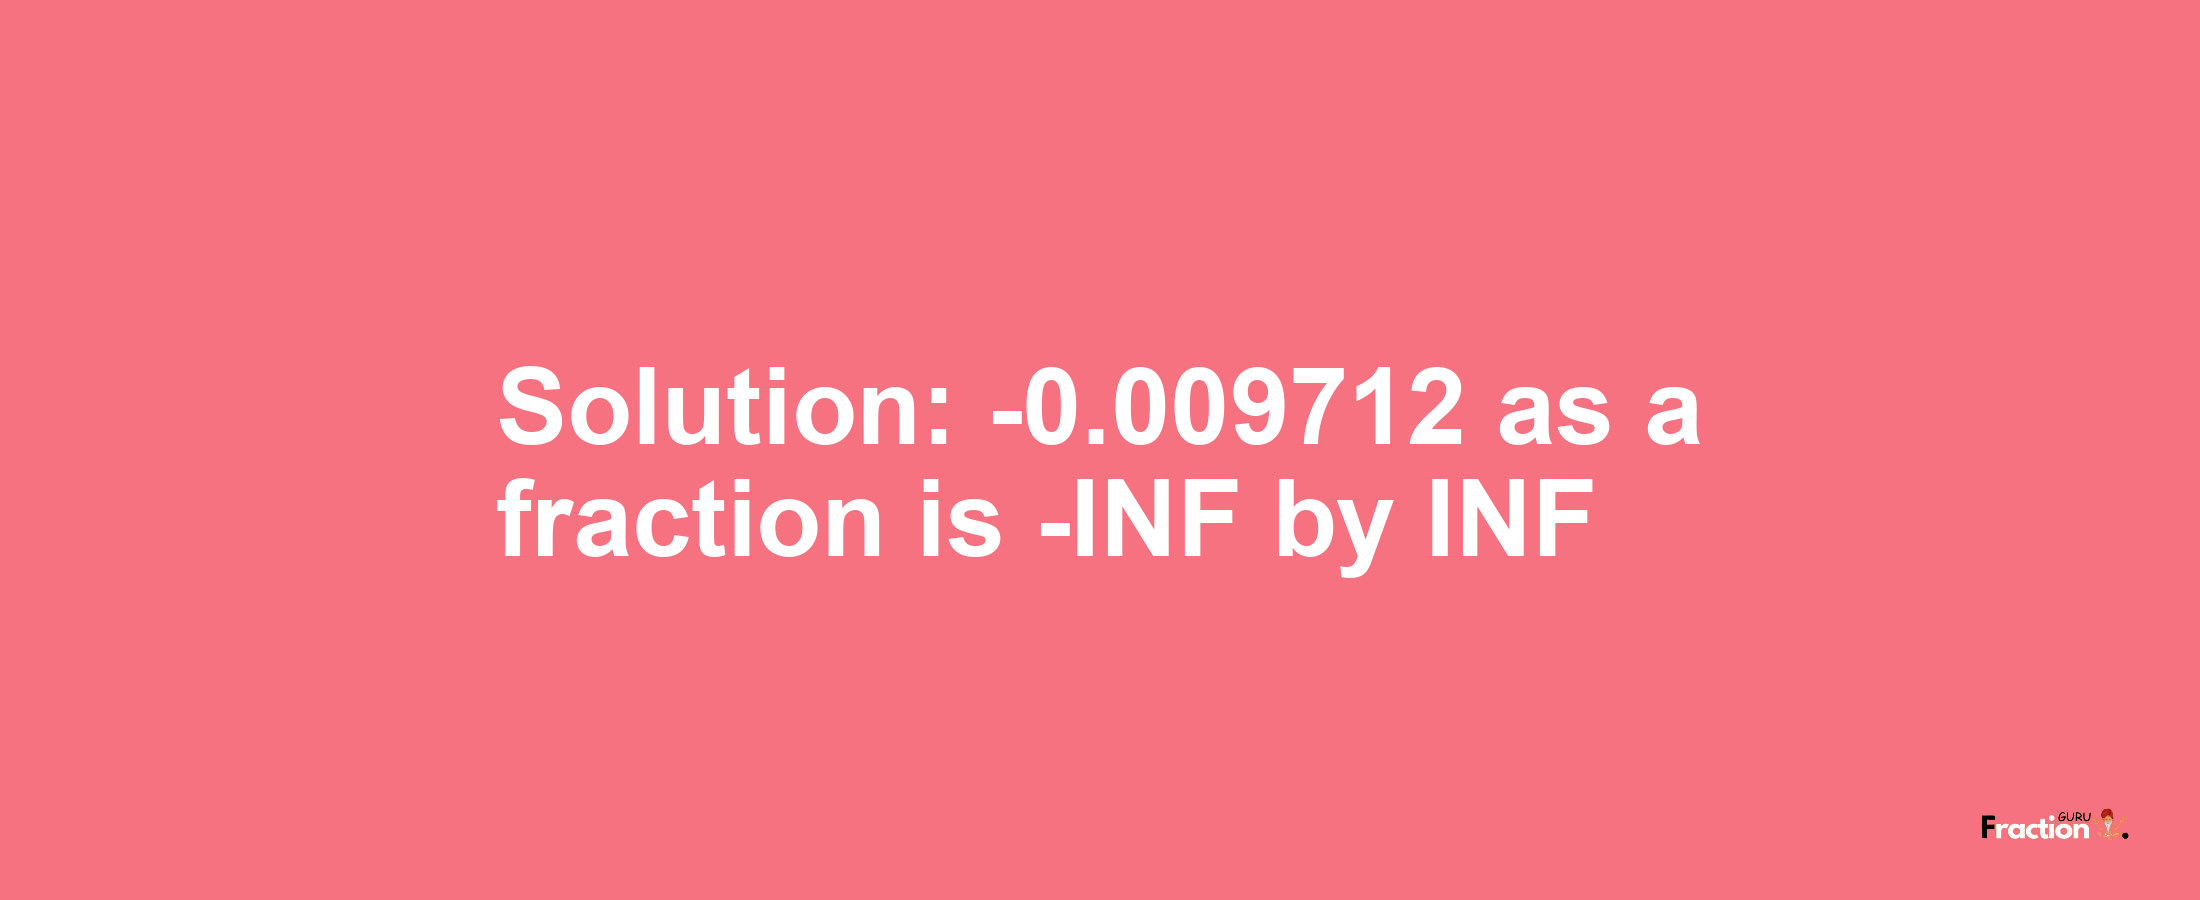 Solution:-0.009712 as a fraction is -INF/INF